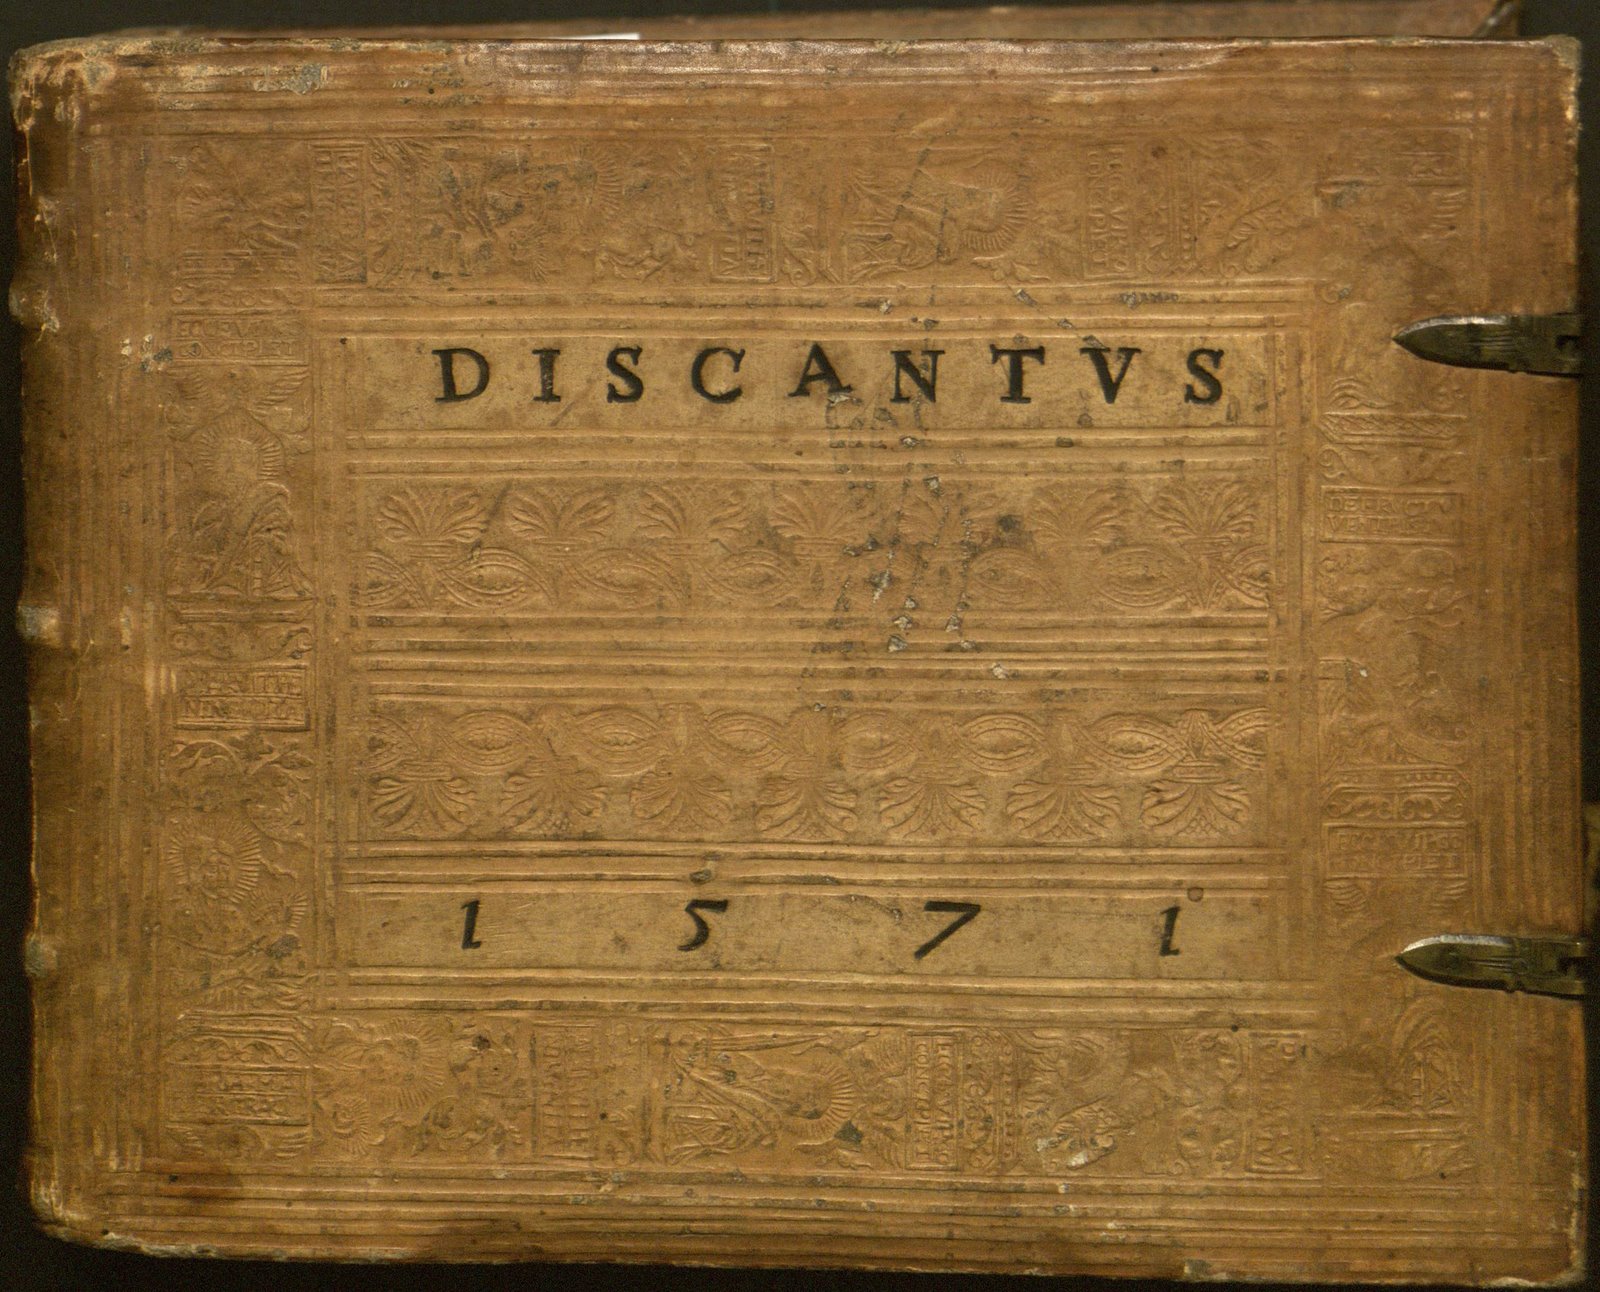 Cover of partbook DISCANTVS 1571, a bound volume with date 1571